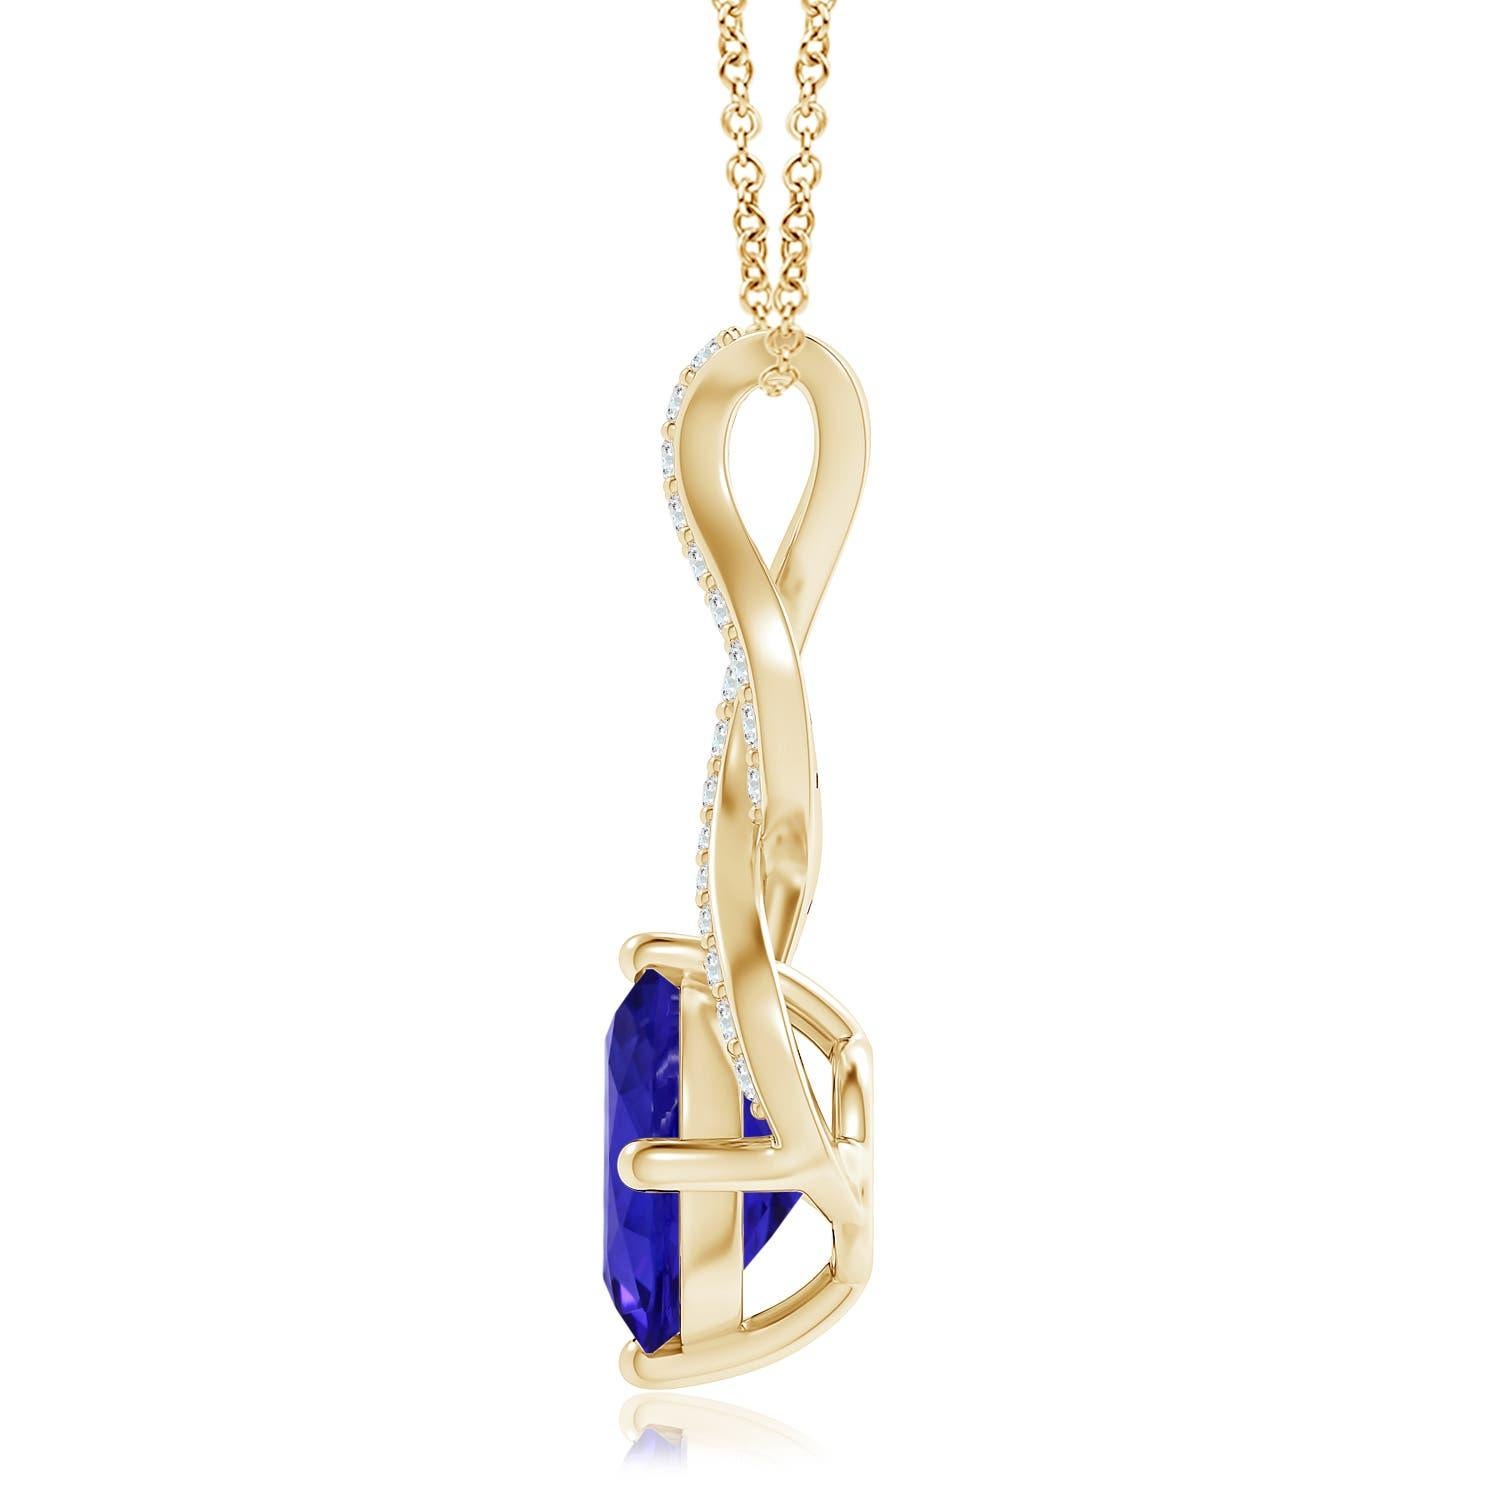 A beautiful interpretation of the iconic infinity sign, this 18k yellow gold tanzanite pendant features a dazzling infinity-shaped bale. The prong-set GIA certified tanzanite is accentuated by the brilliant diamonds on the twisted bale.
